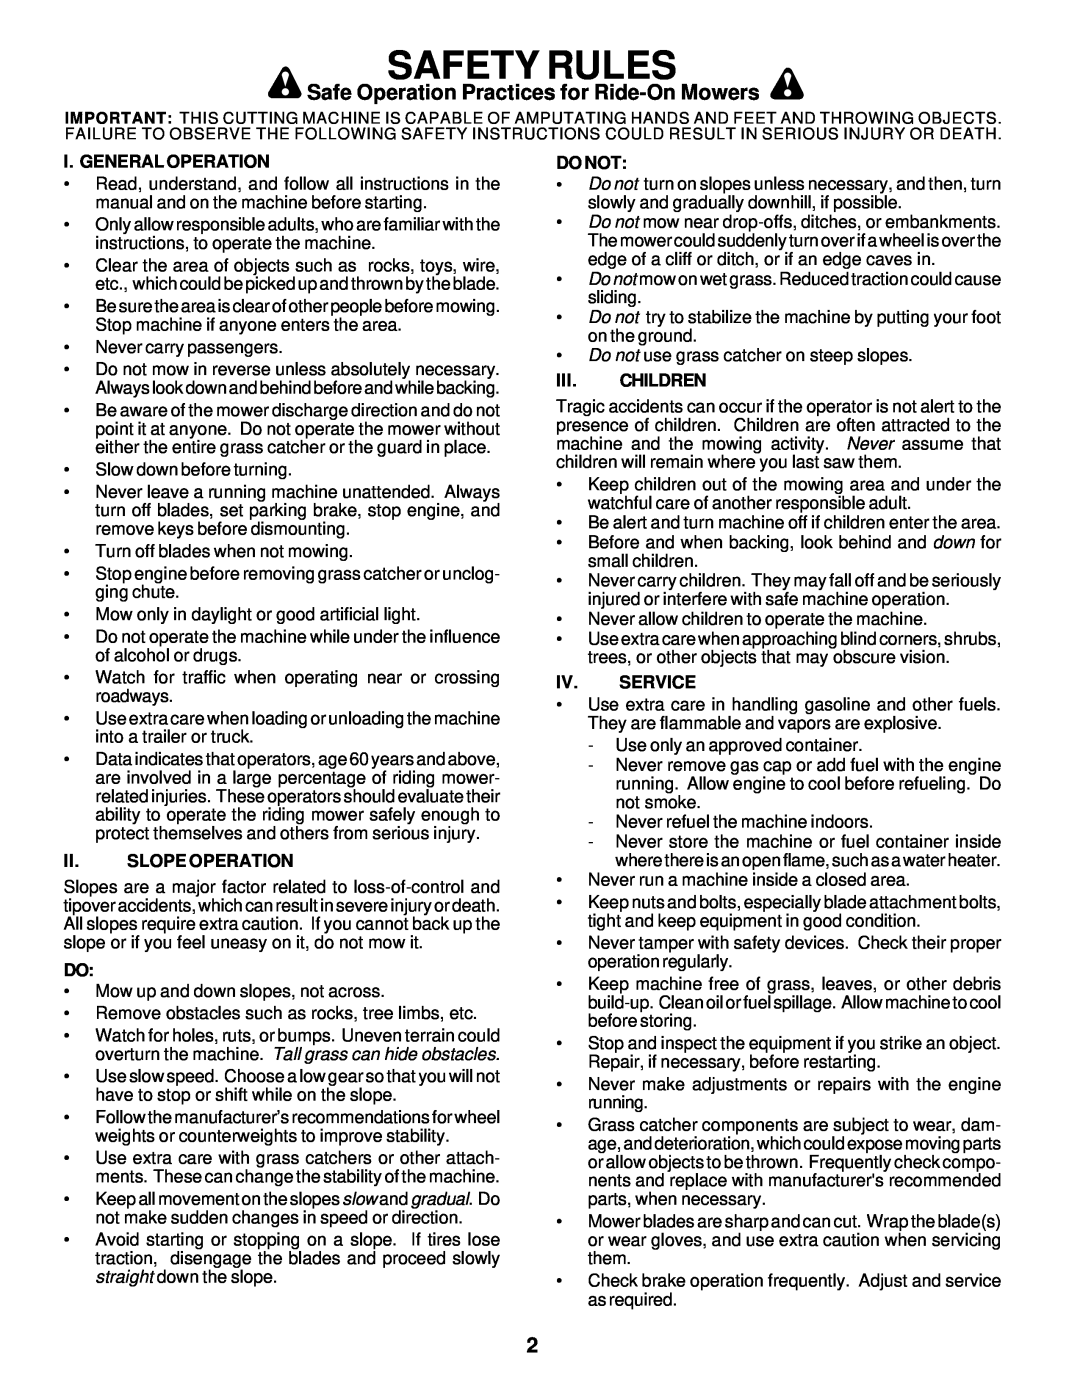 Poulan PR20H42STB owner manual Safety Rules, Safe Operation Practices for Ride-On Mowers 